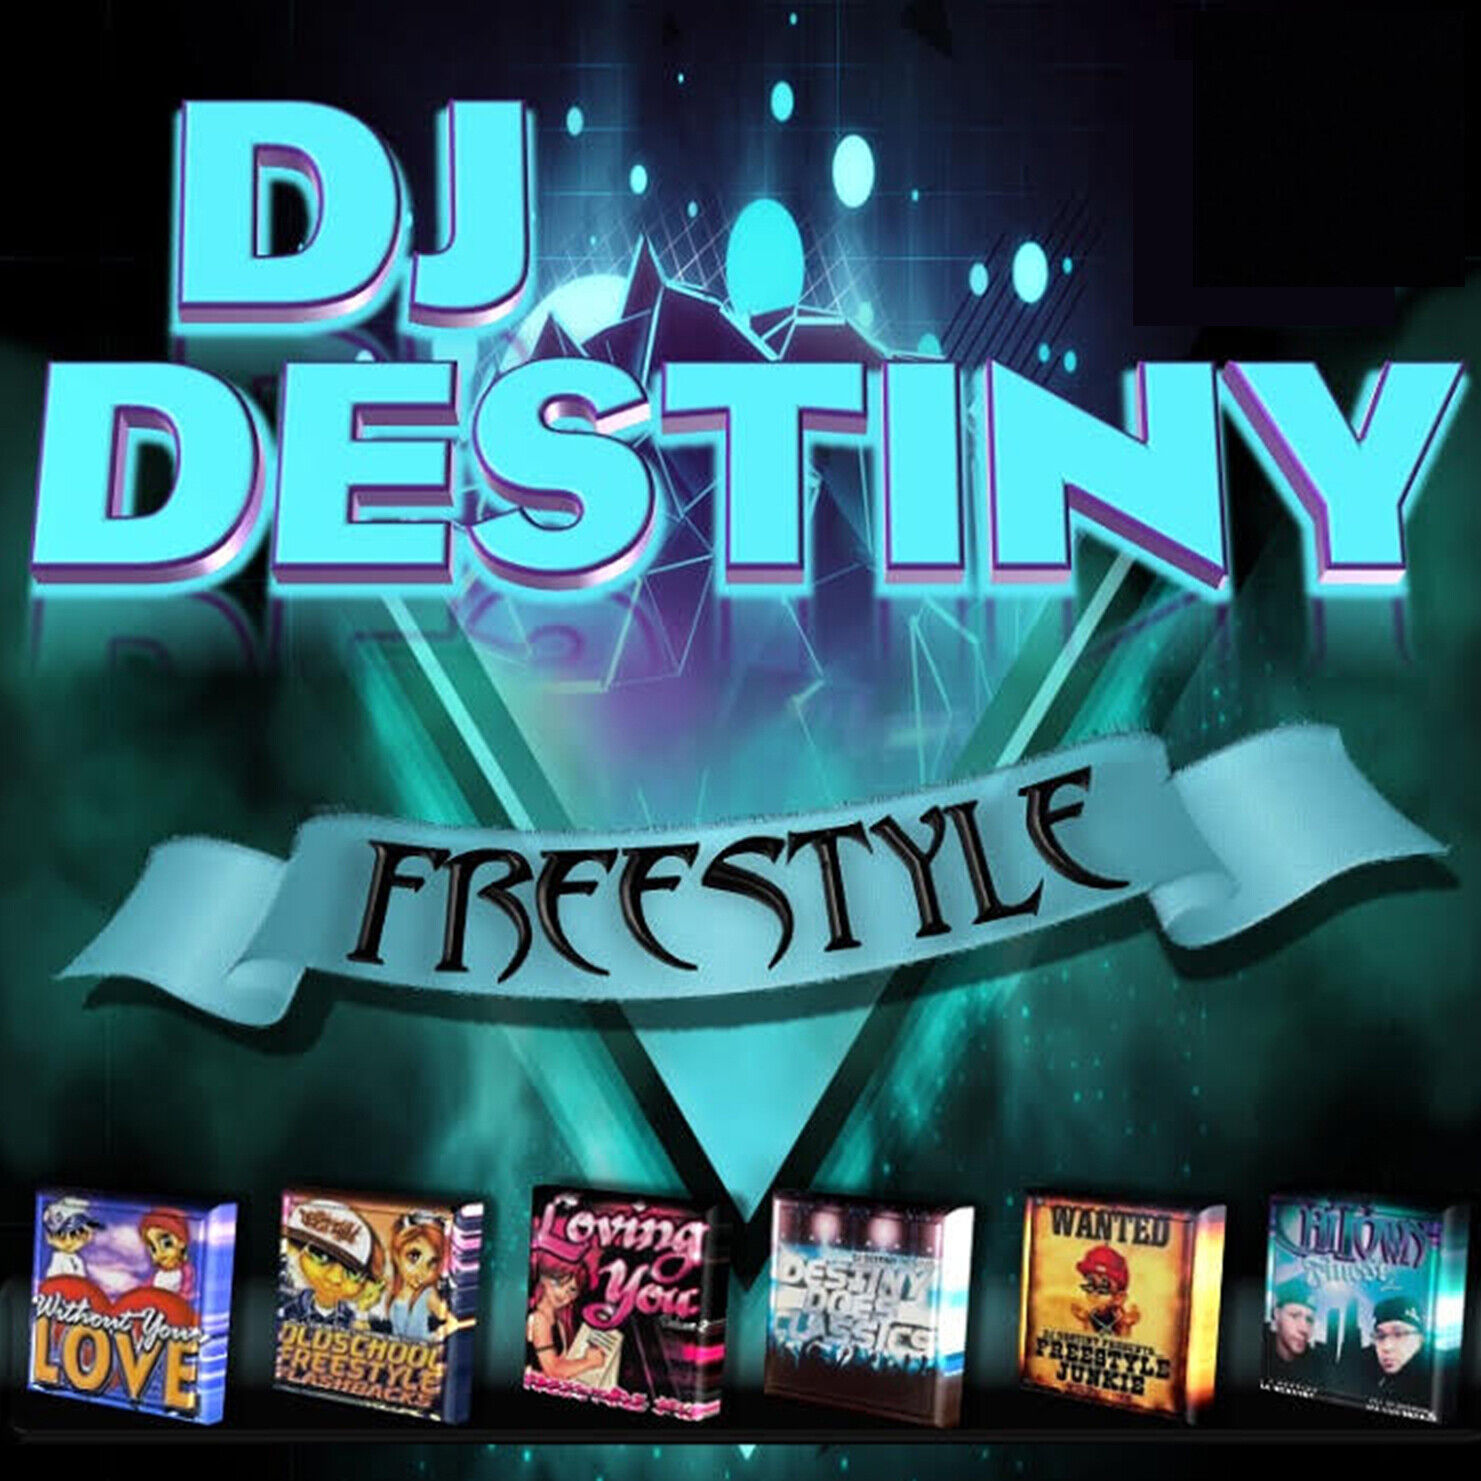 DJ DESTINY - CHICAGO USB (66 MIXES) 8 Hour Freestyle Mix Is Included